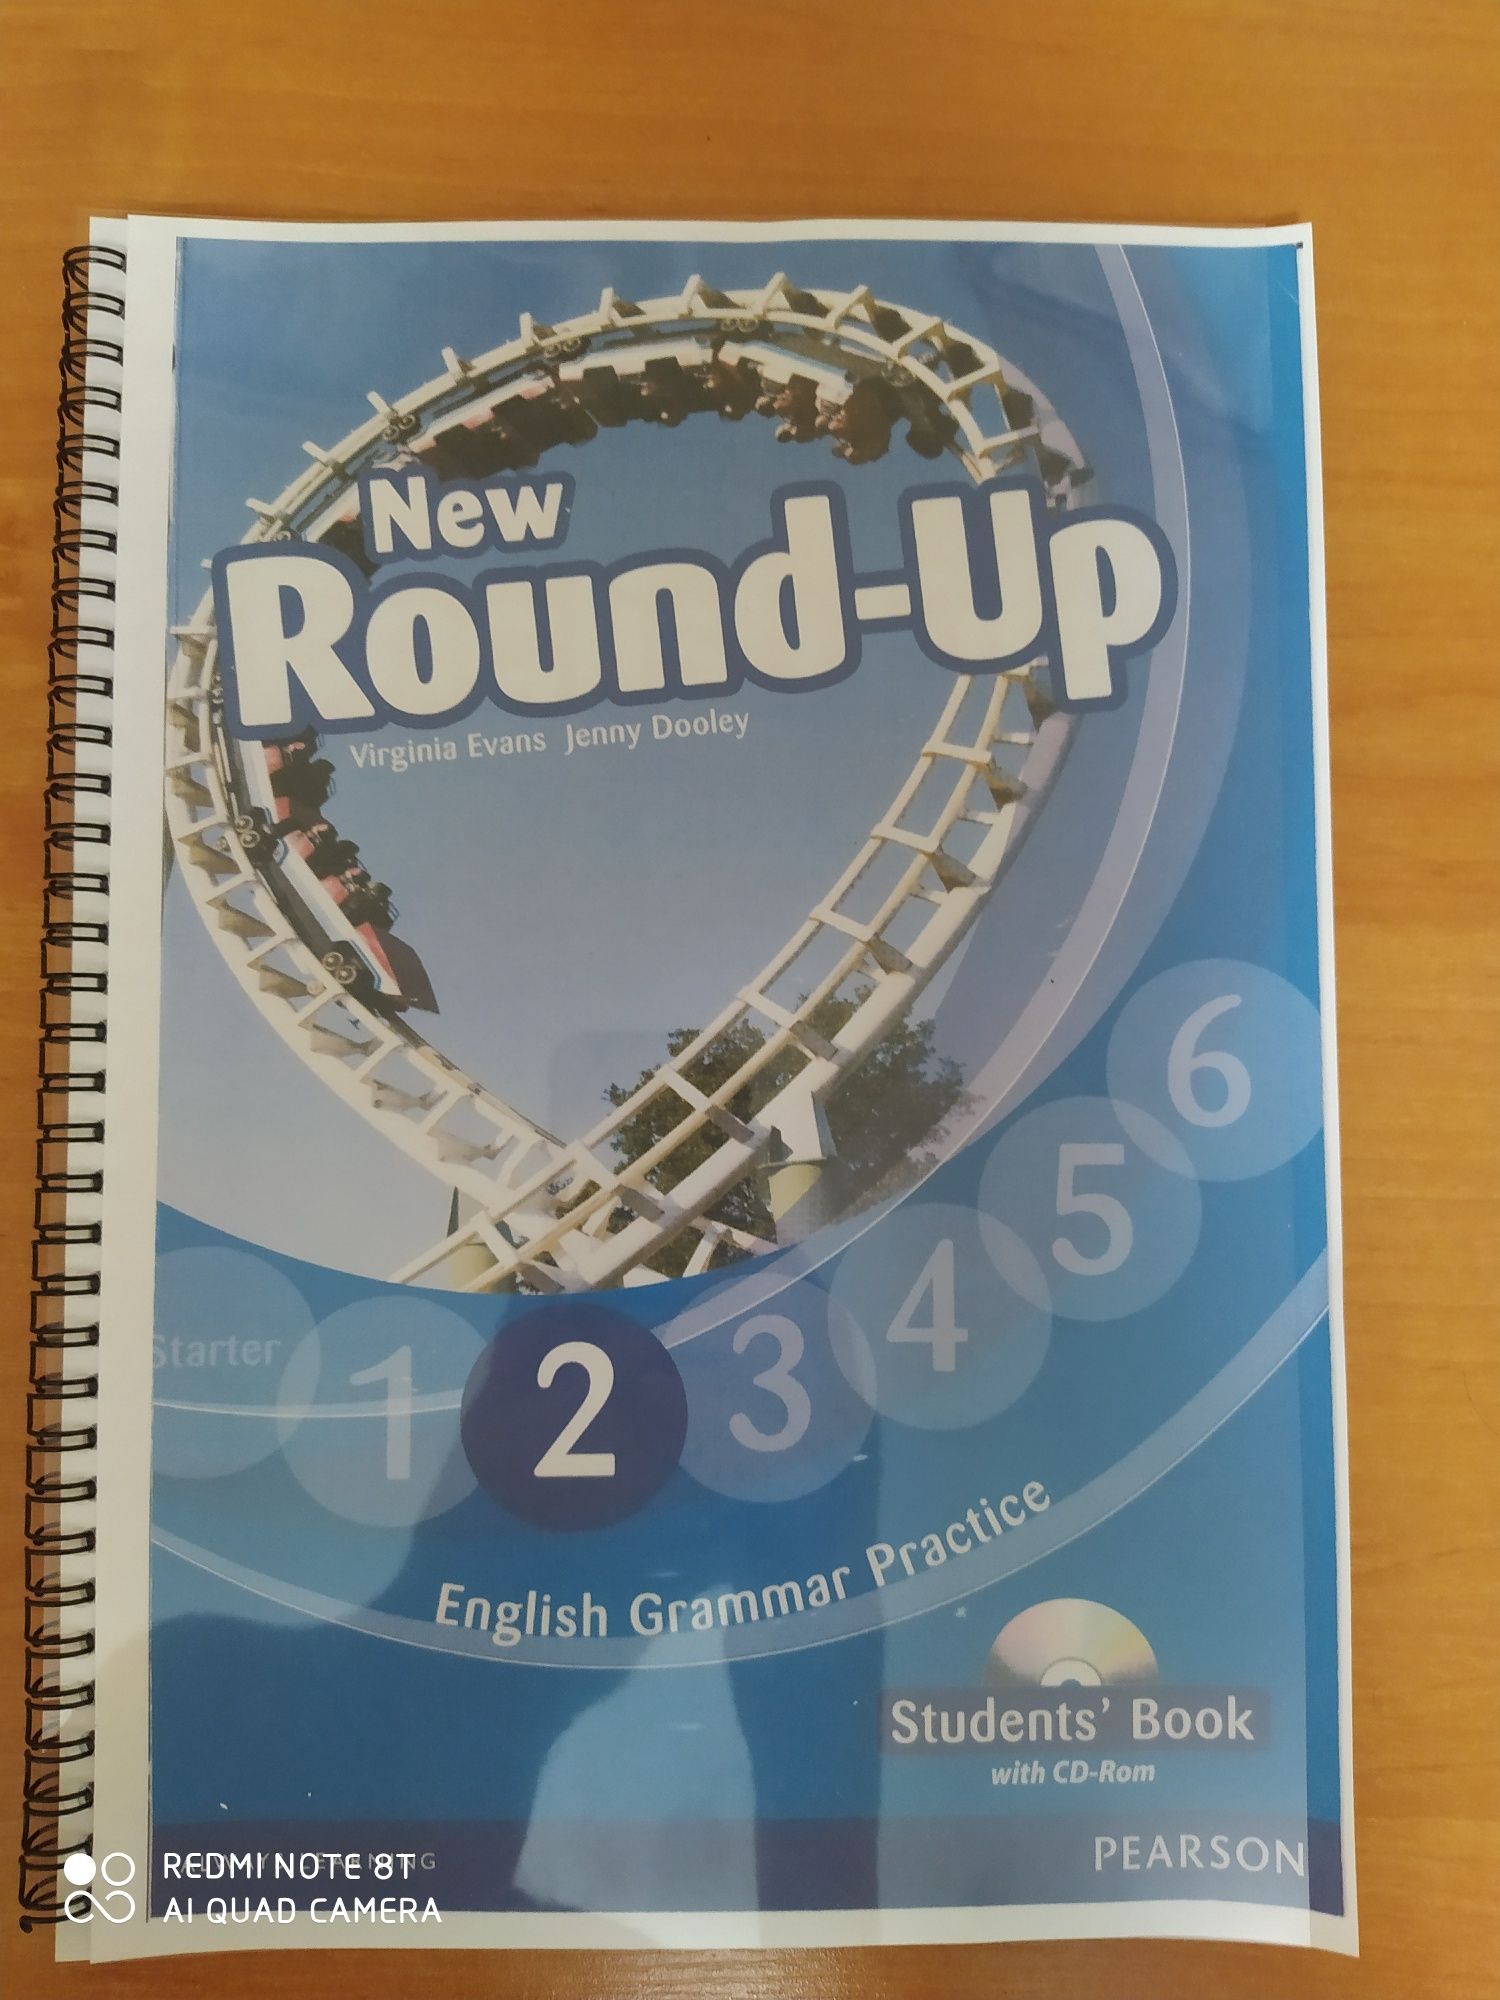 Ner round up 2 Students' book